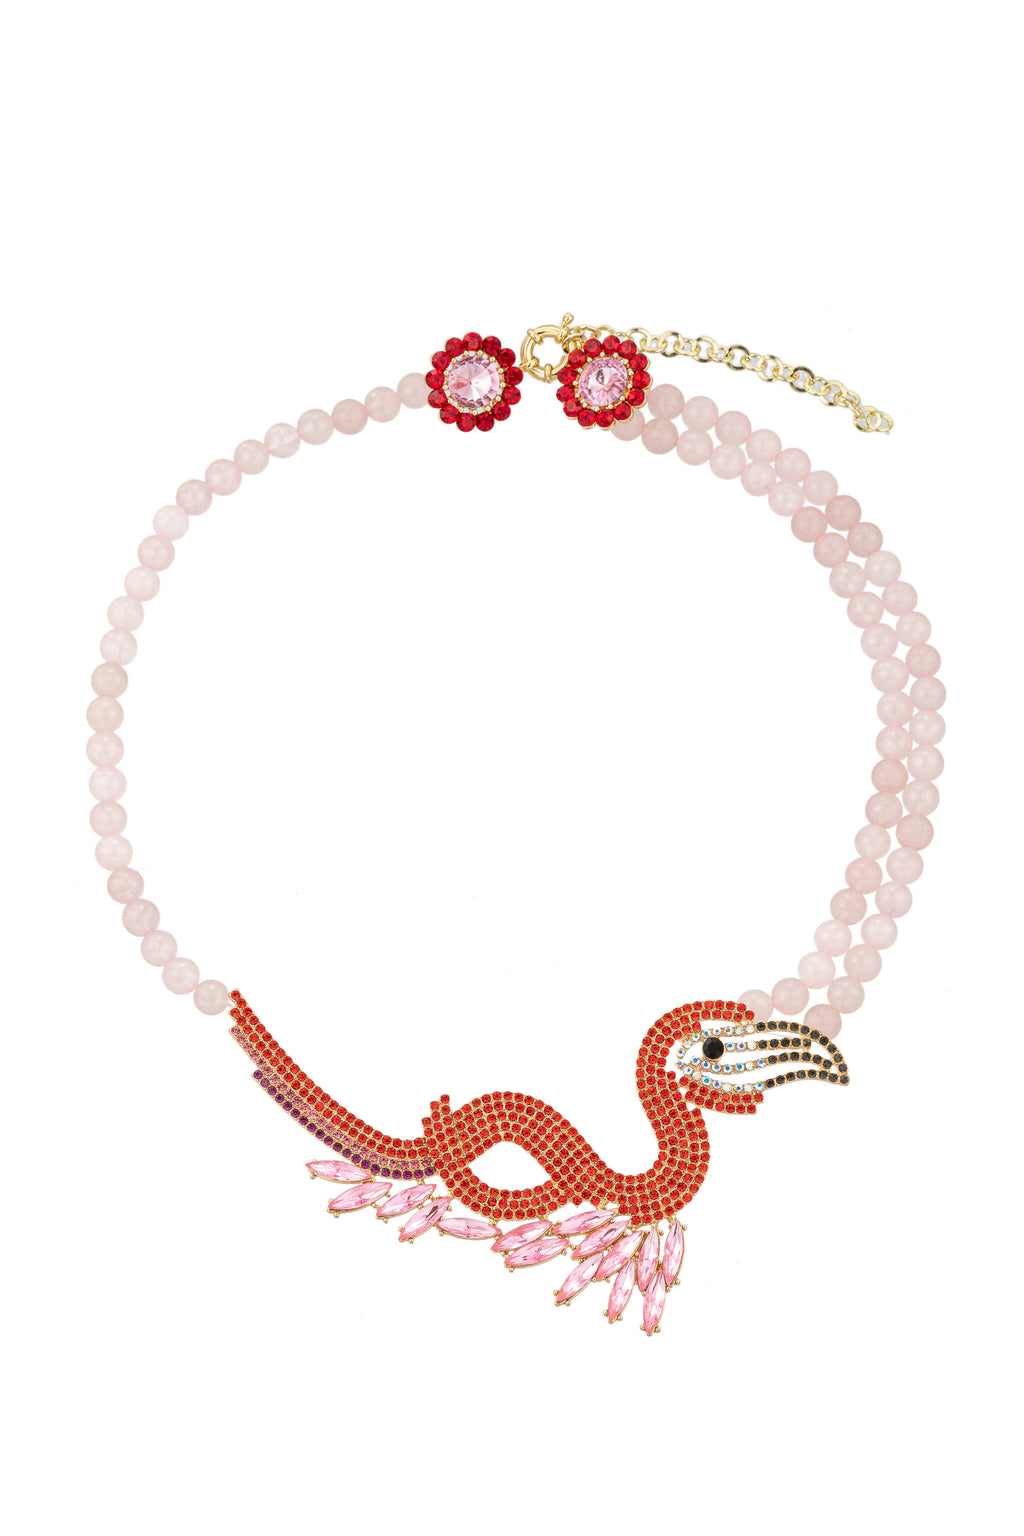 Rose quartz beaded statement necklace with a glass crystal flamingo pendant.